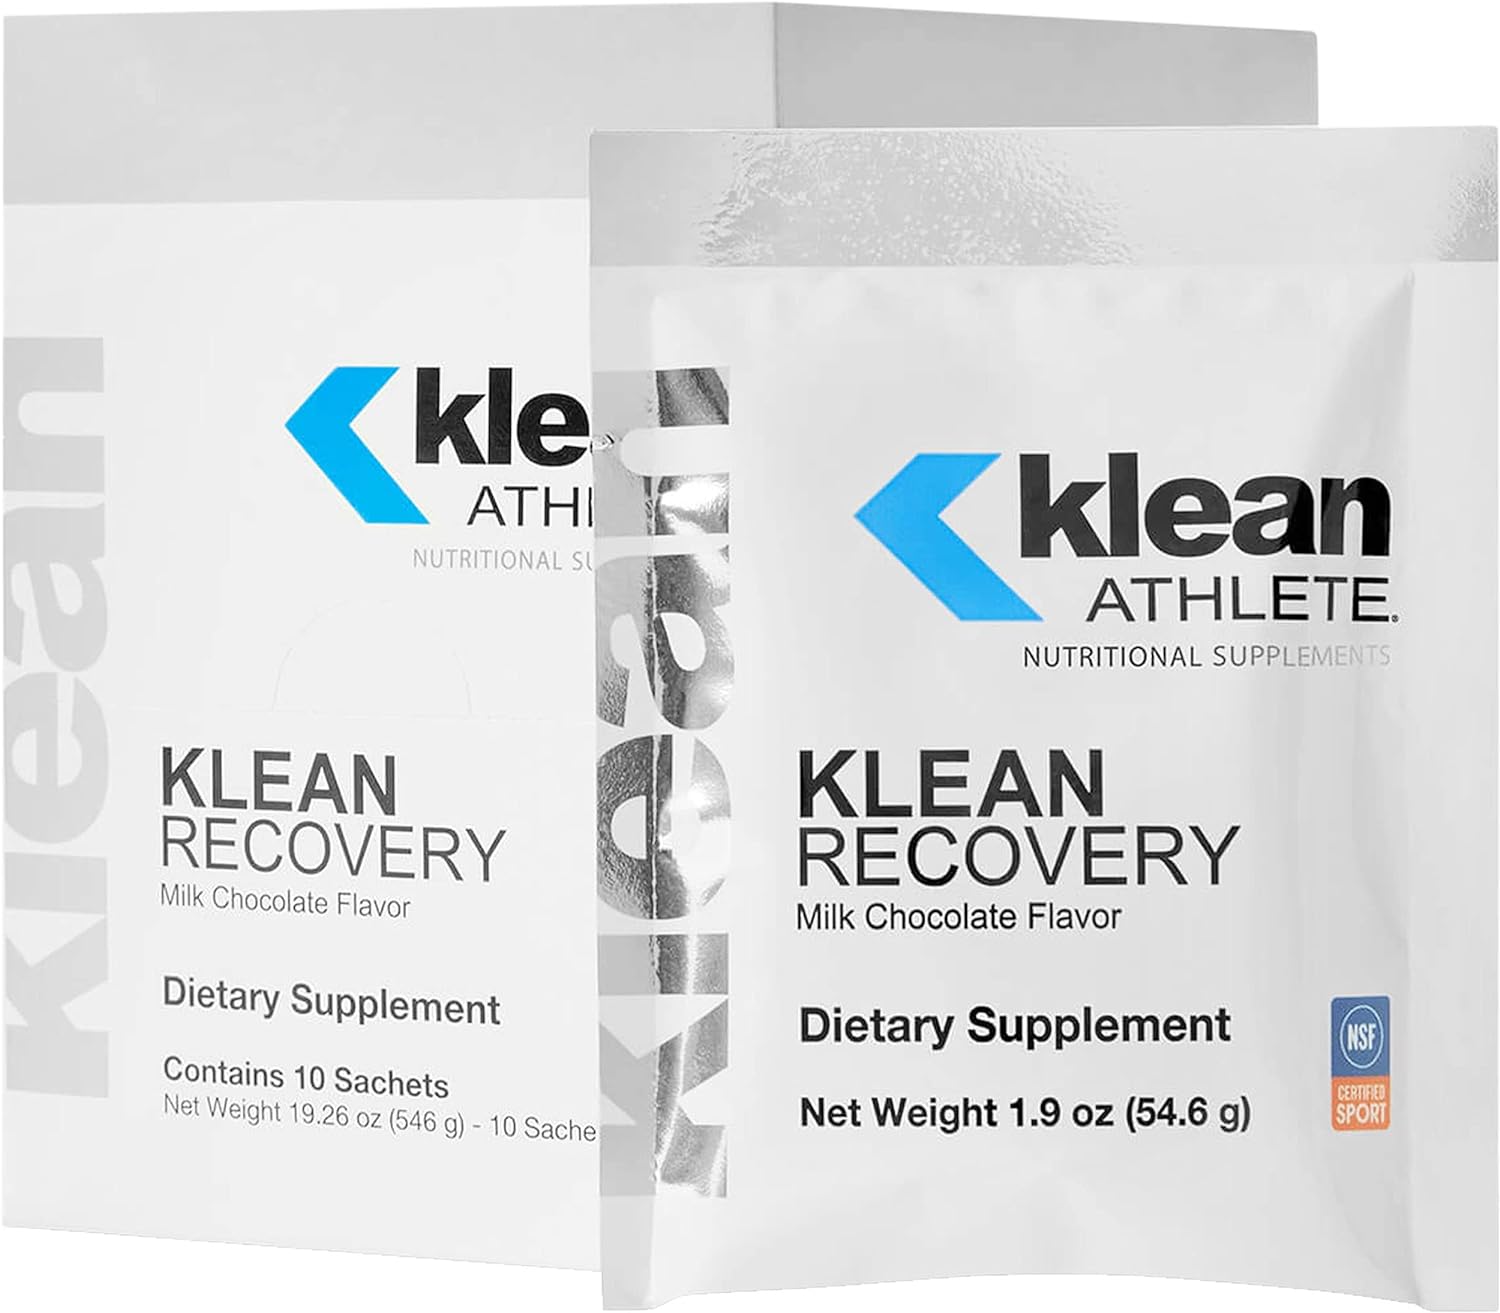 Klean ATHLETE Klean Recovery | Optimizes Muscle Recovery After Exercis